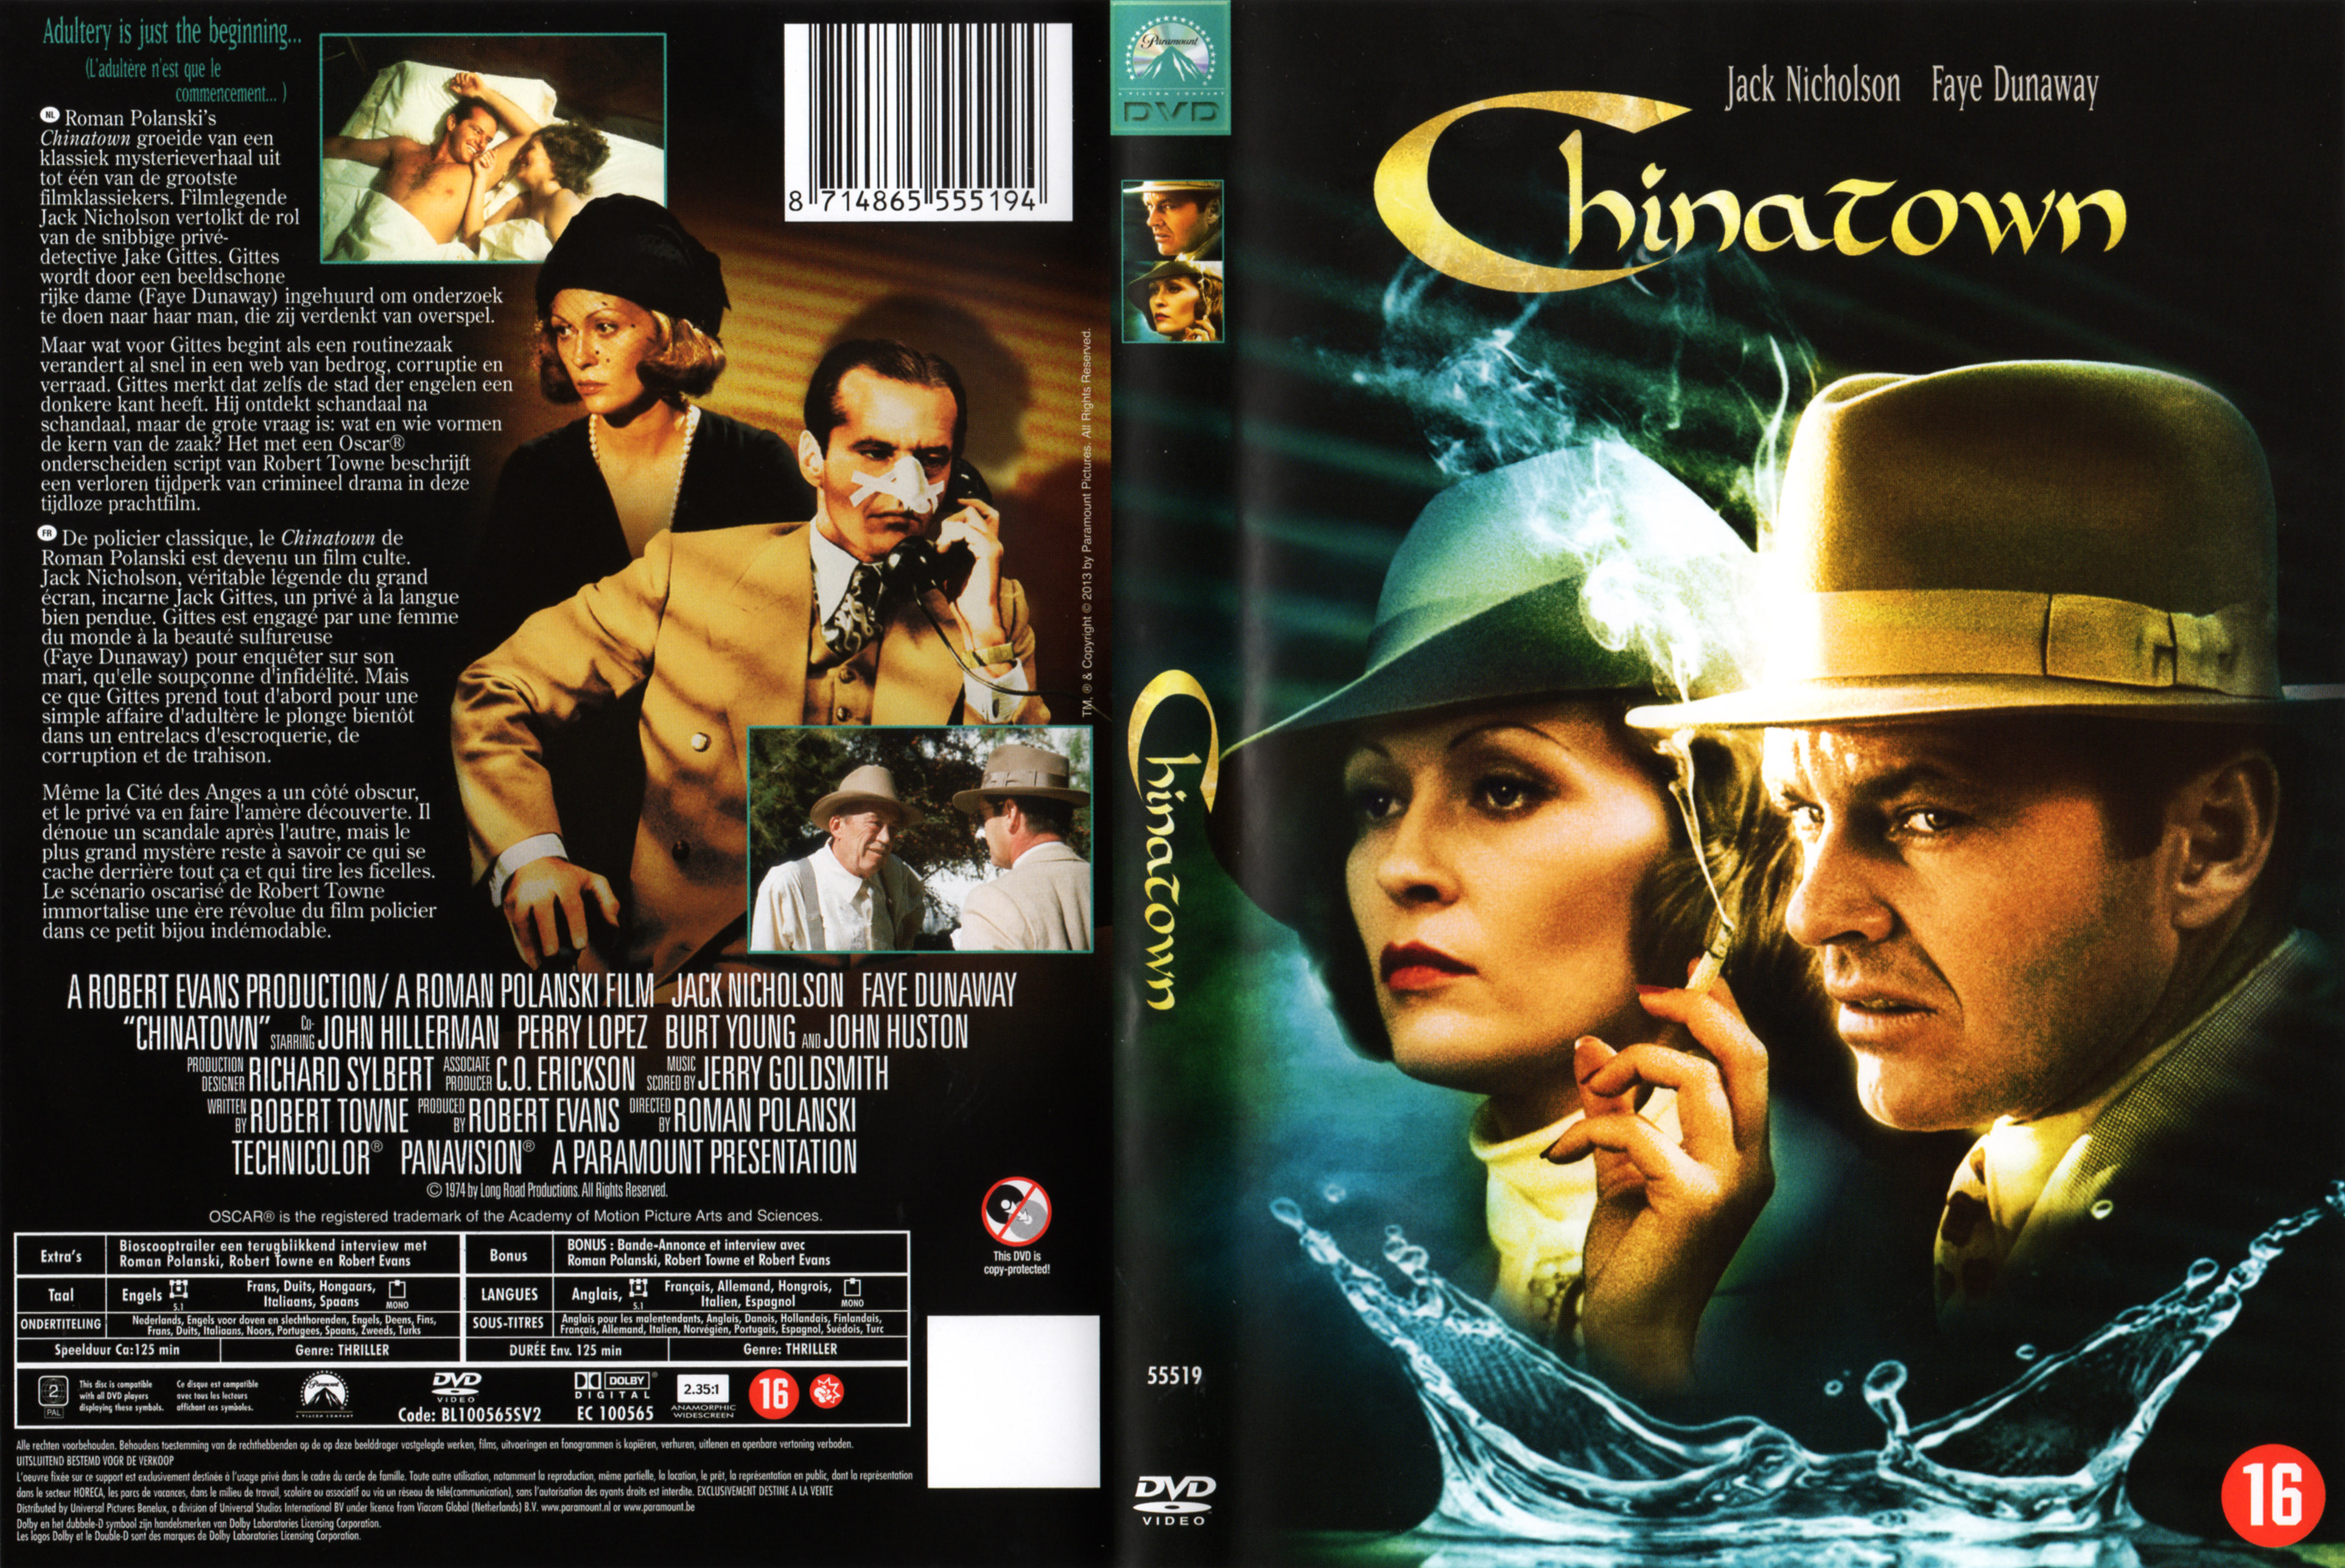 Jaquette DVD Chinatown v2